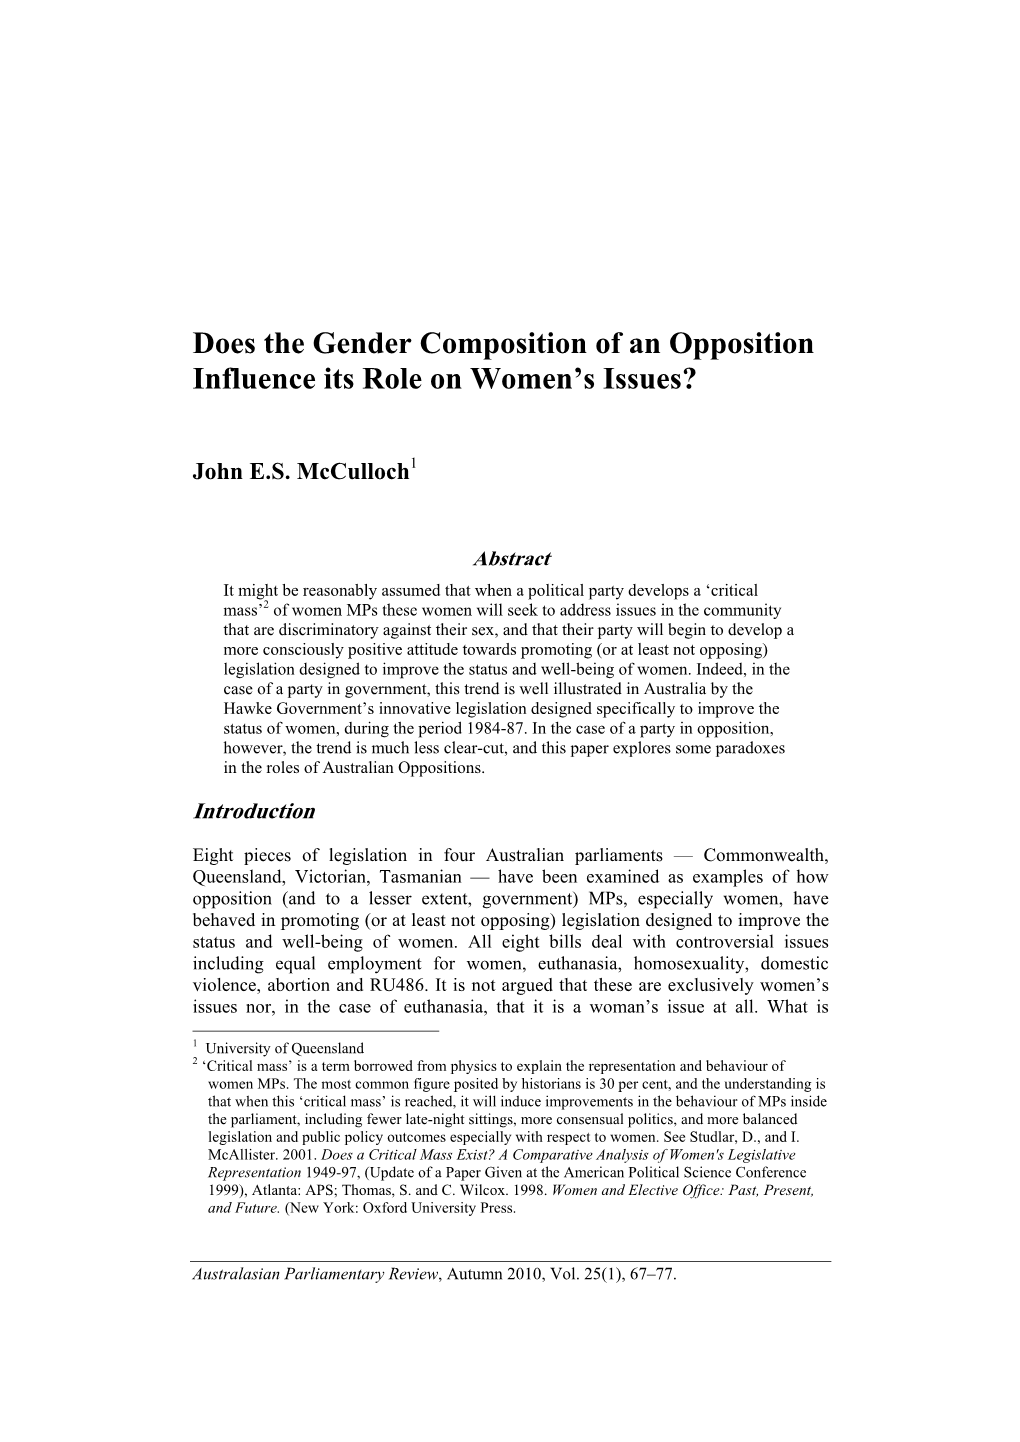 Does the Gender Composition of an Opposition Influence Its Role on Women’S Issues?